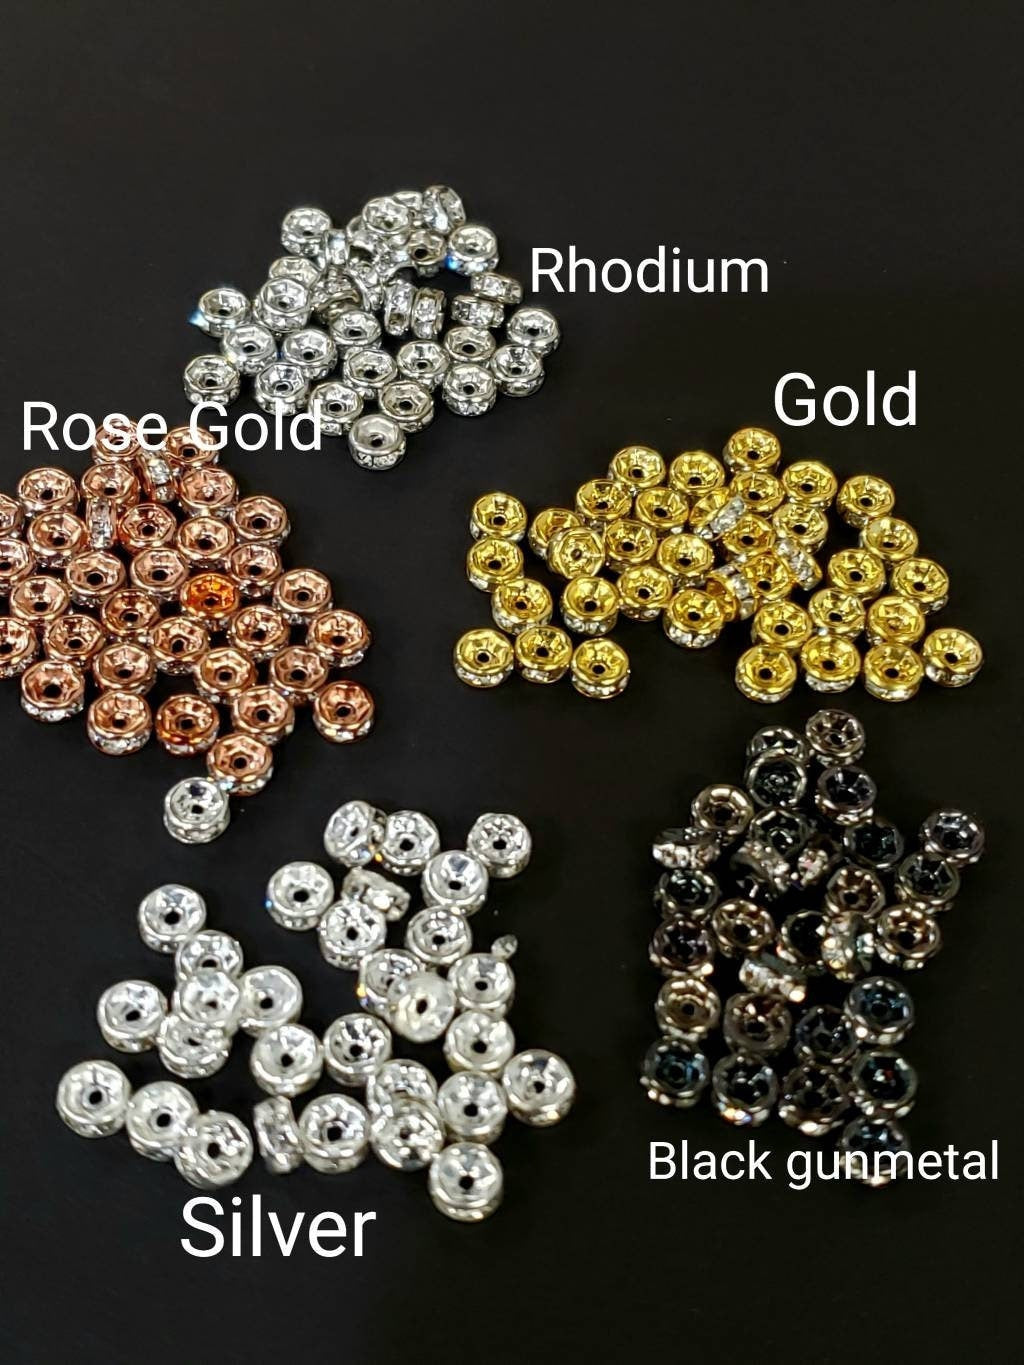 50 pcs 4mm Rhinestone Roundel Crystal bling sparkly Spacer bead for jewelry making supplies.Silver, gold, Rhodium , black 4 colors,